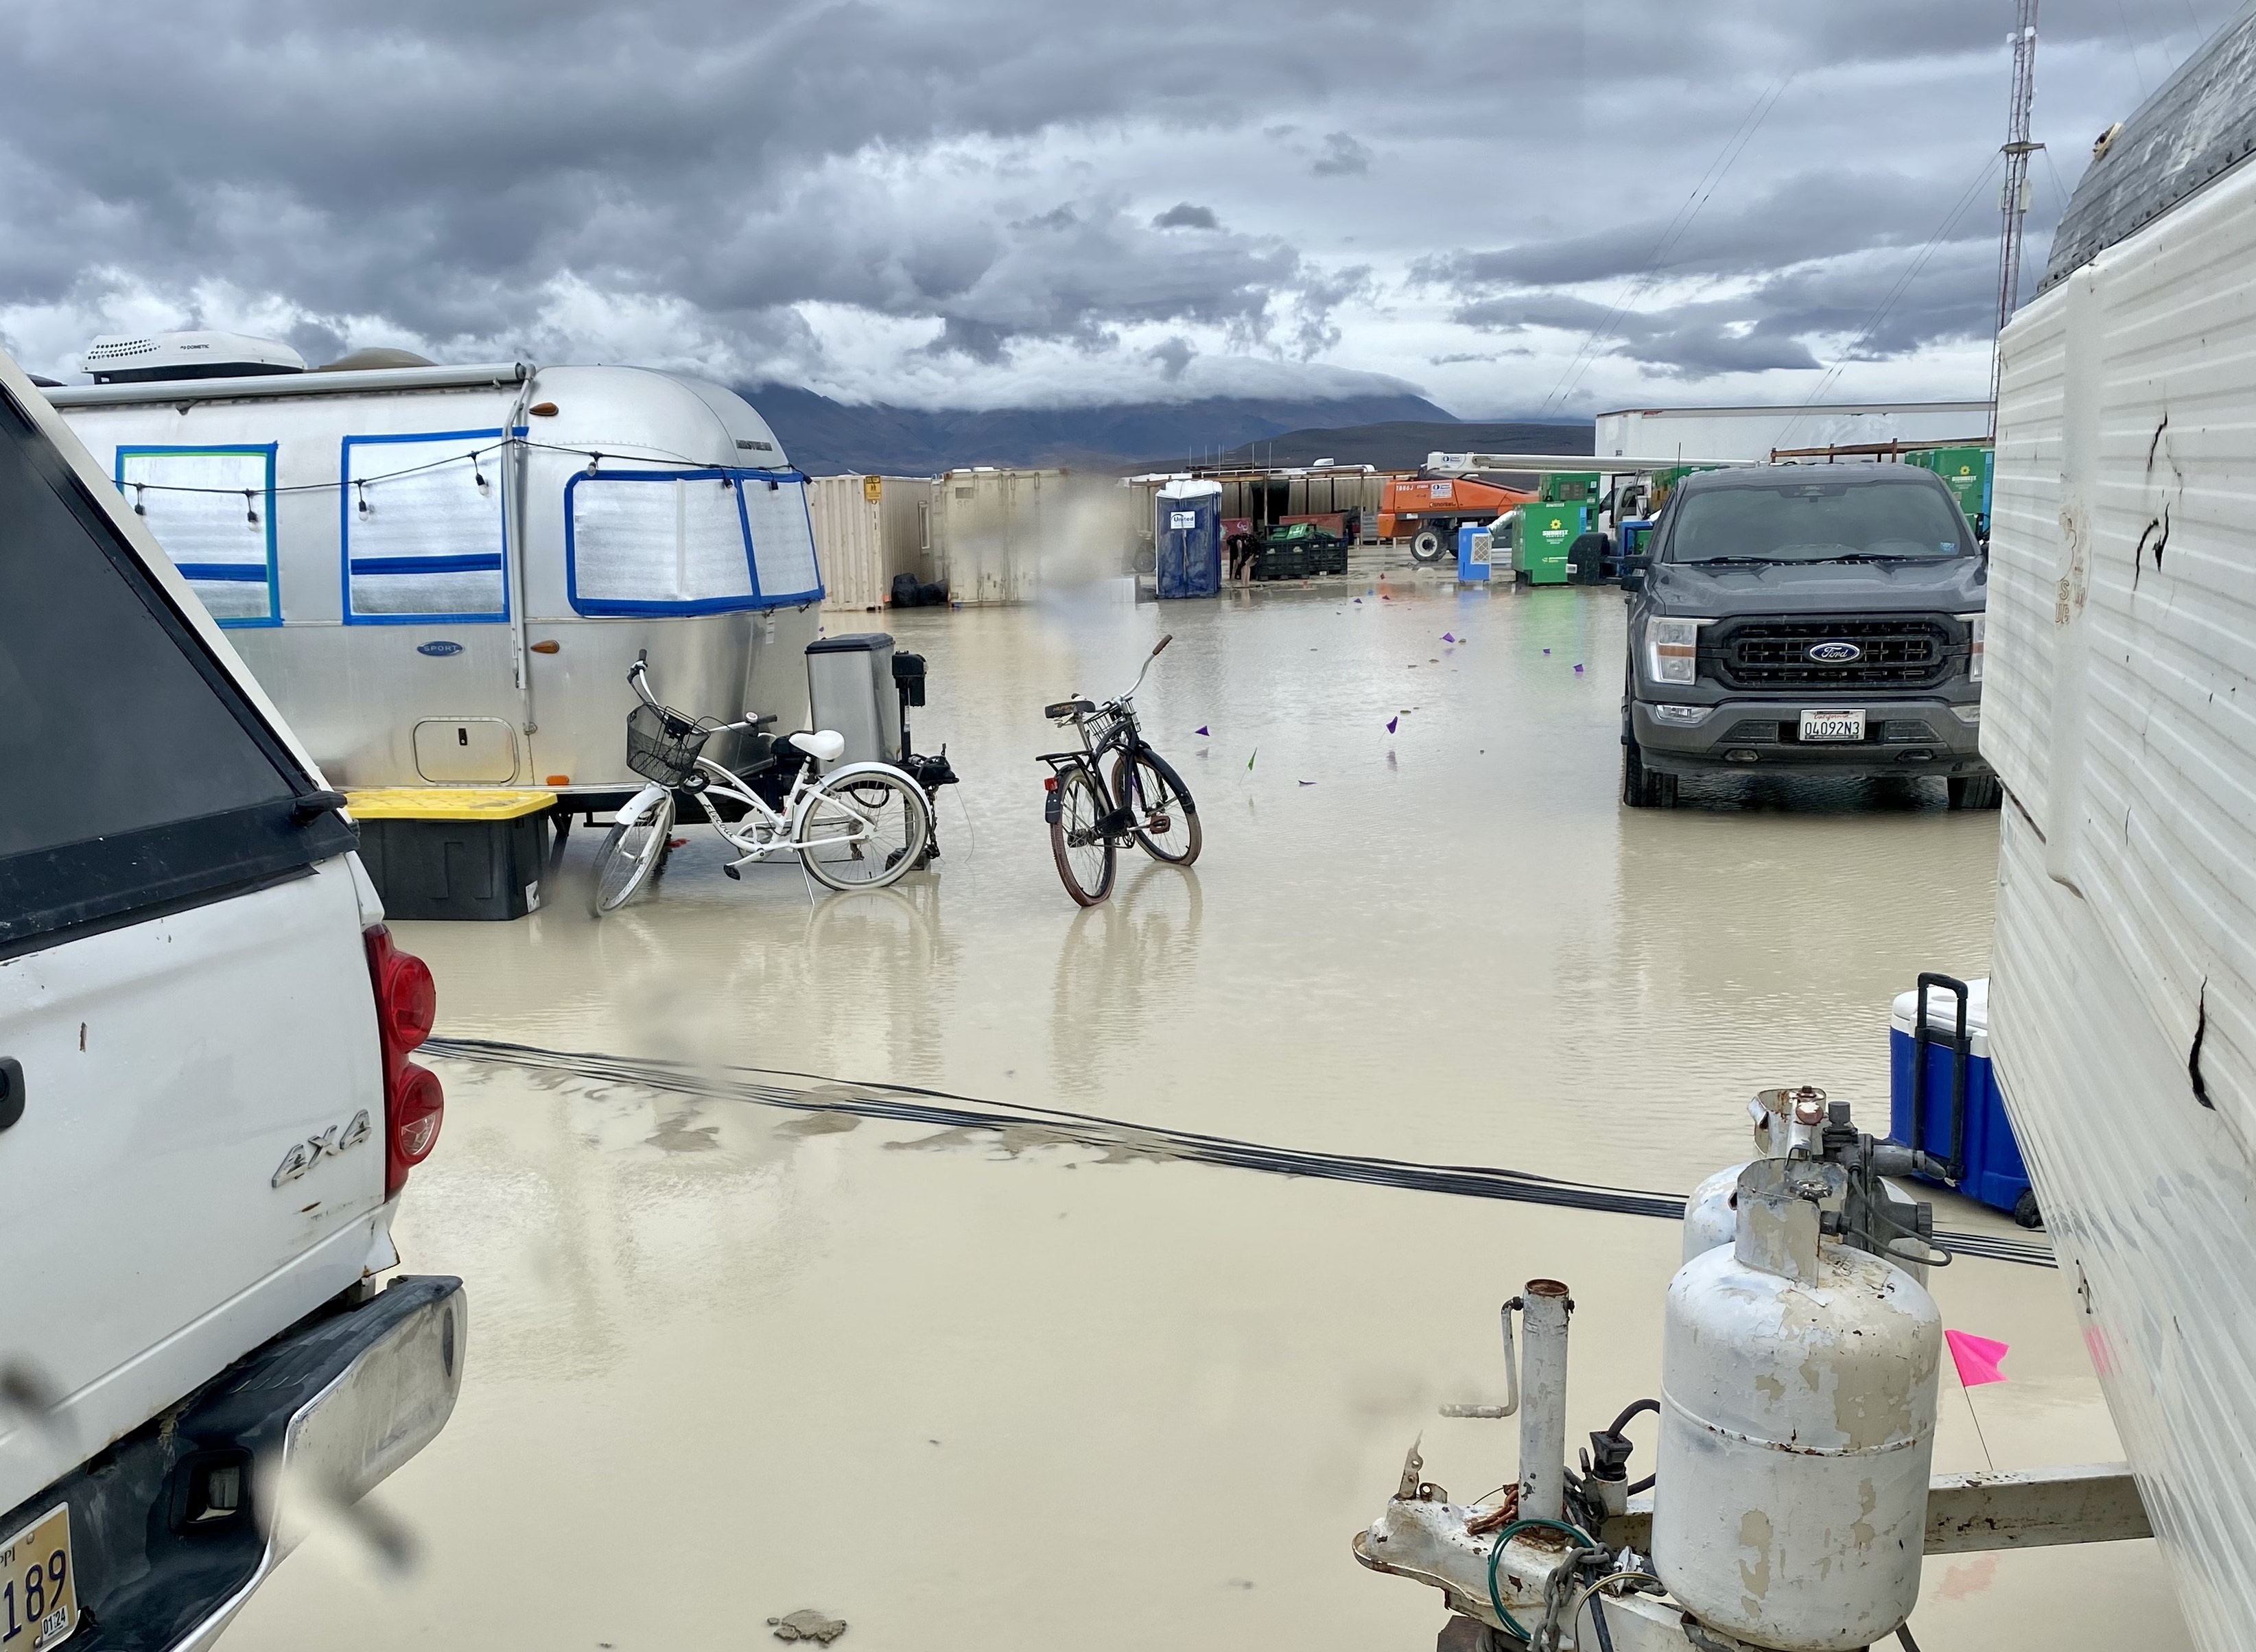 A flooded campground with vehicles, trailers, and submerged bikes, under stormy skies.